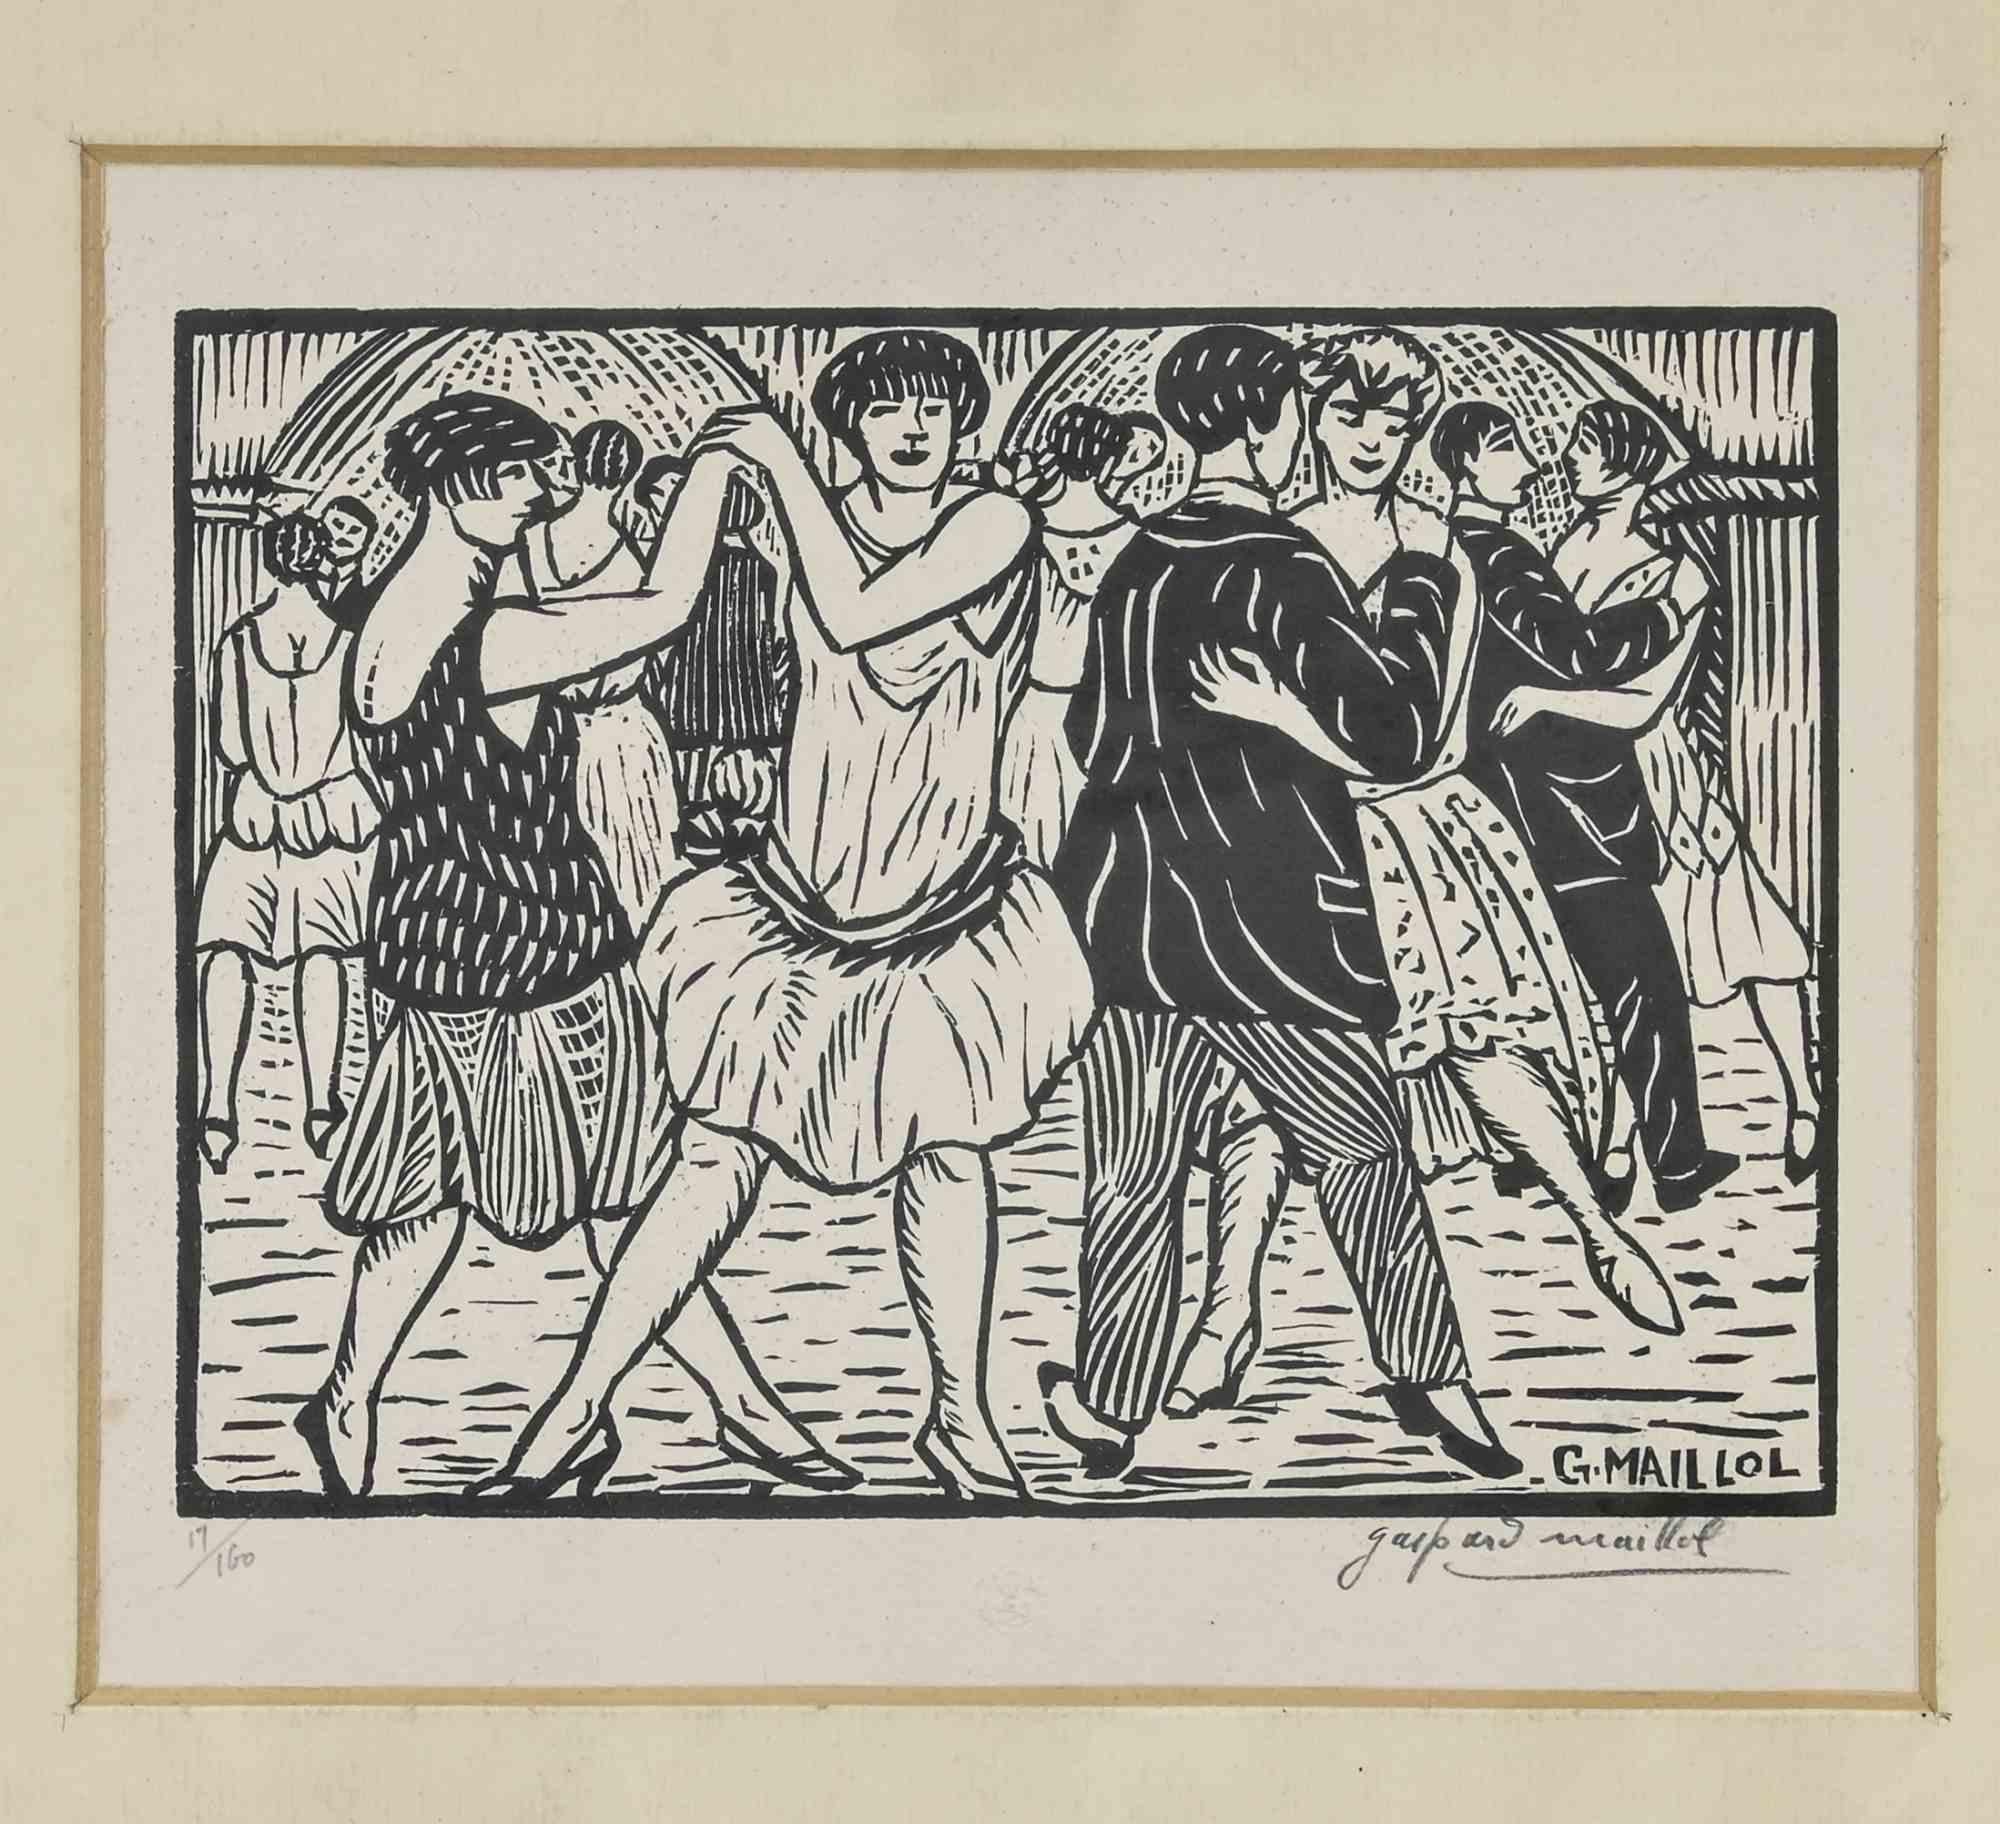 Dance hall is a woodcut print realized by Gaspard Maillol (1880-1946).

Hand signed by the artist on the lower margin. Edition 19/160.

Gaspard Maillol , born on July 10 , 1880 in Barcelona and died on January 6 , 1946 in Paris , is a French painter